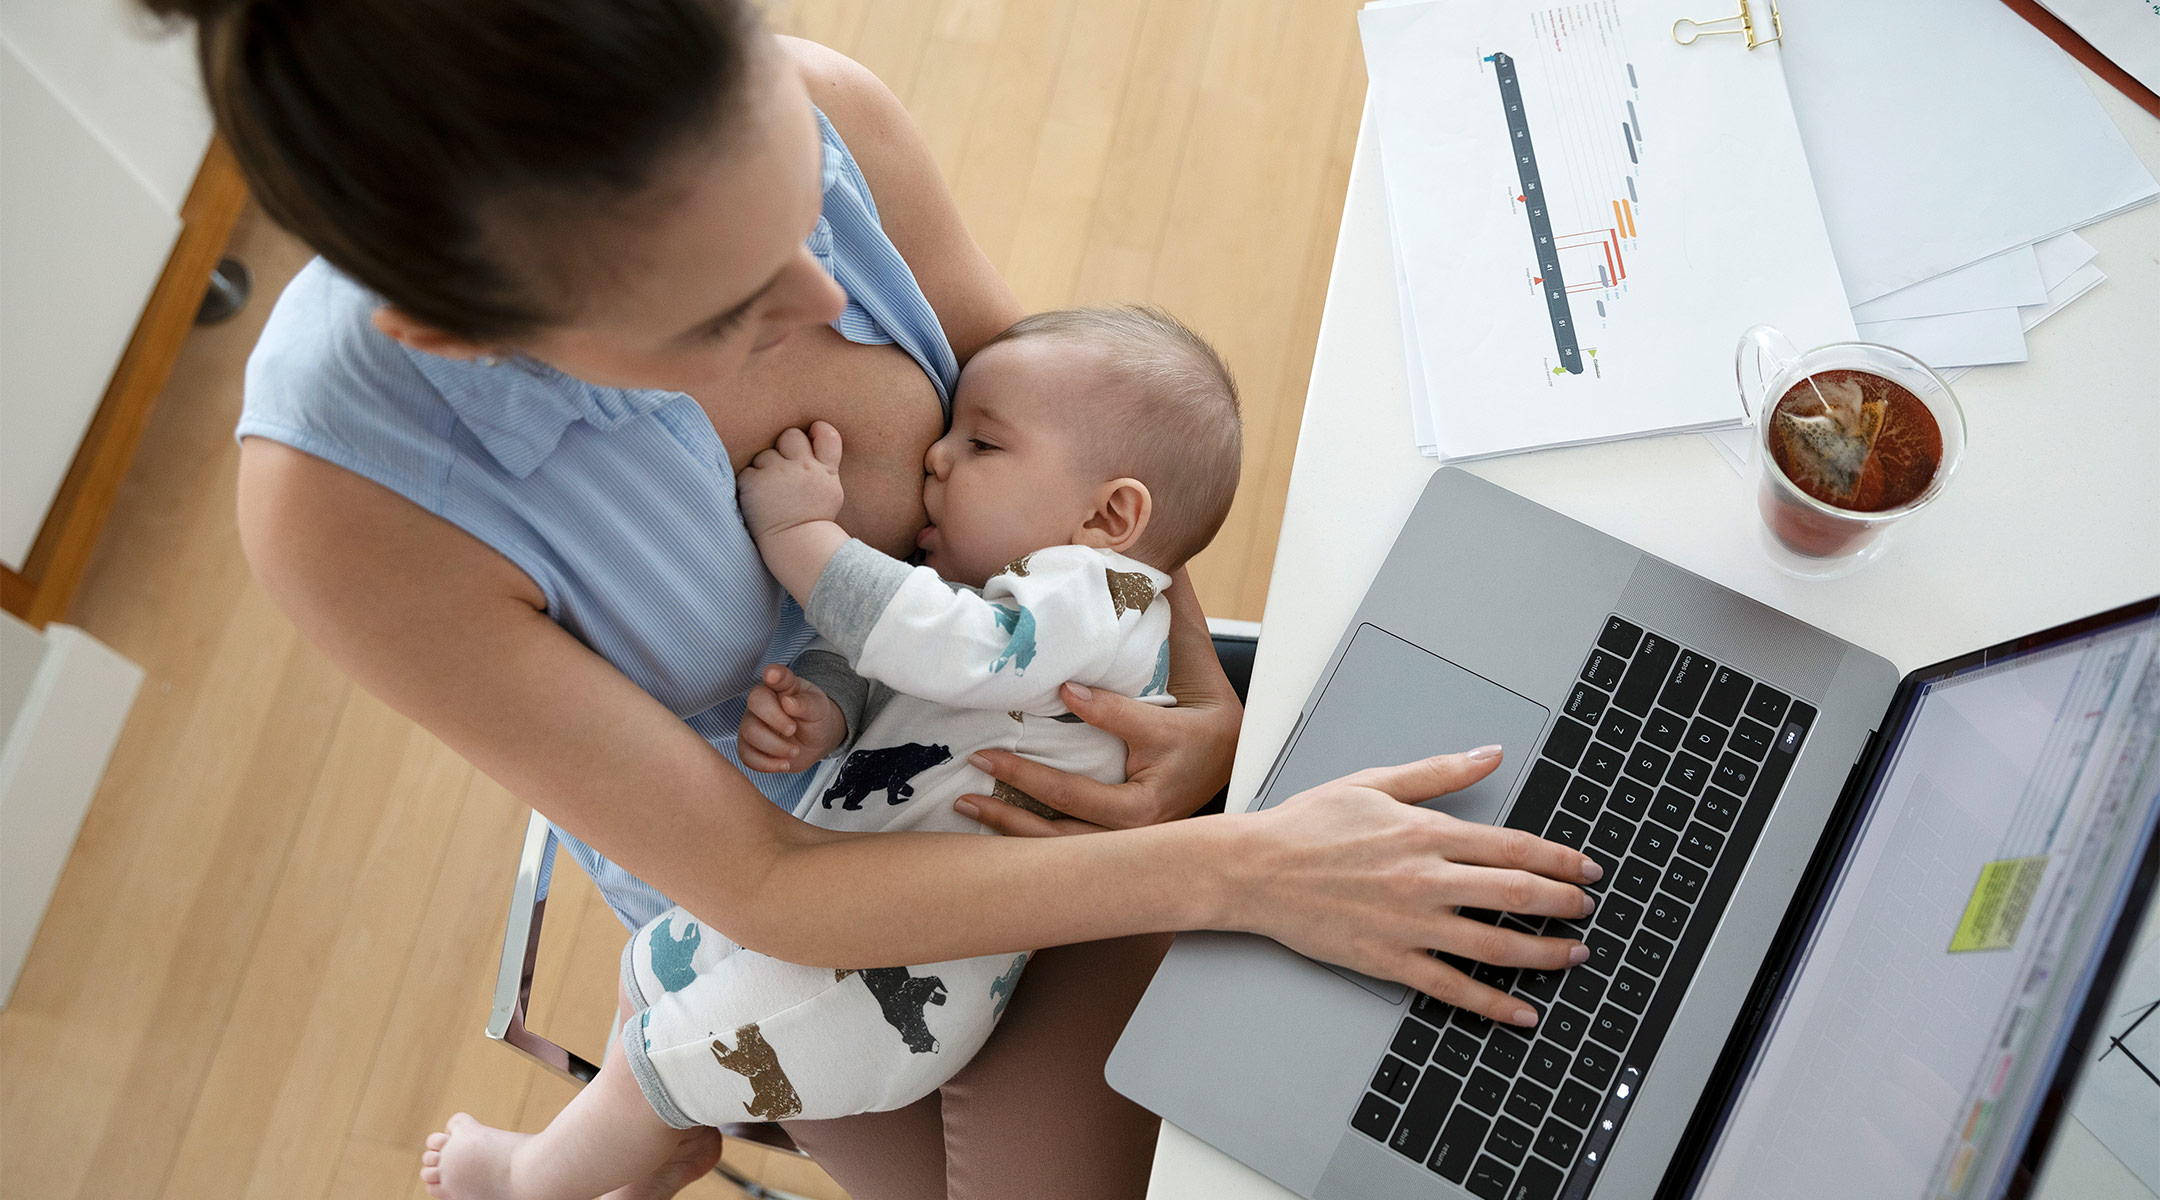 mom breastfeeding her baby while working on computer